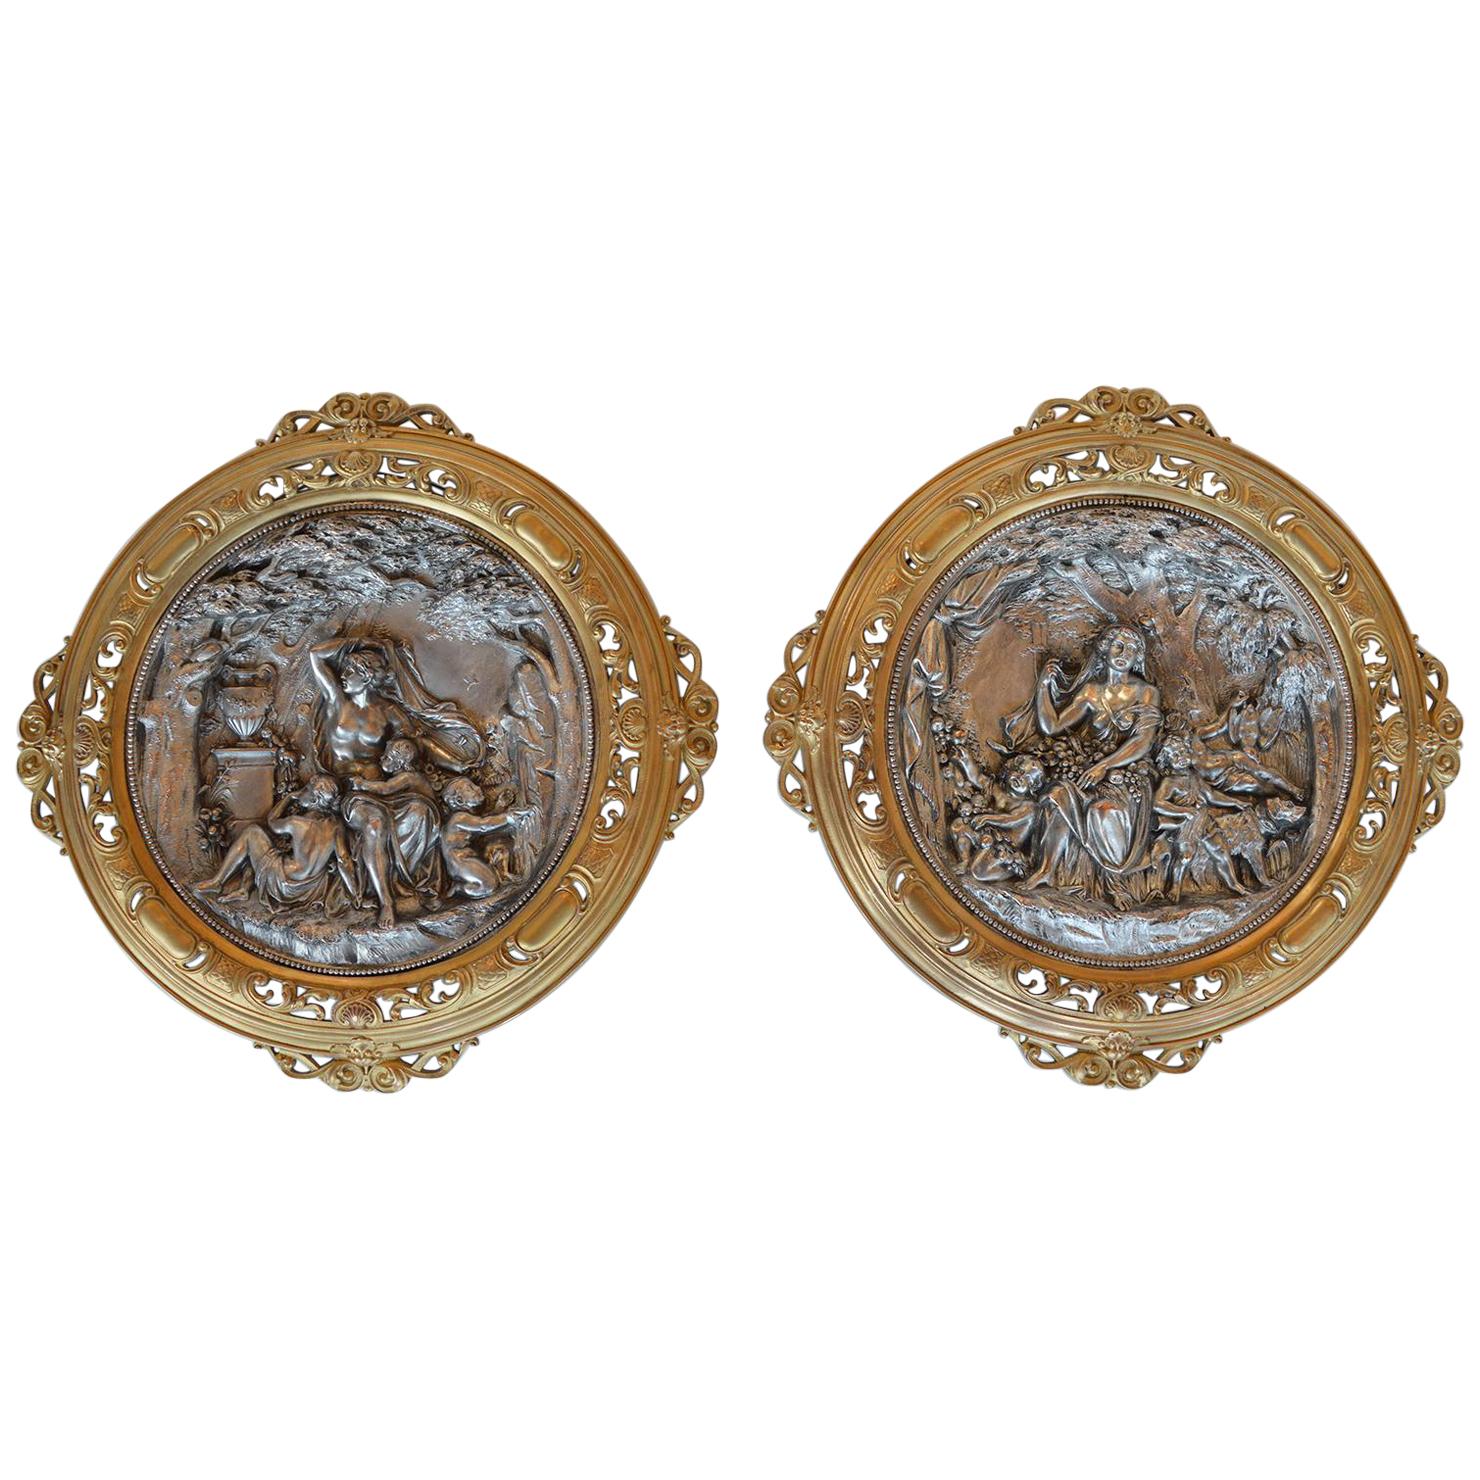 Pair of Deep Relief Figural Metal Wall Plaques, Late 19th Century For Sale